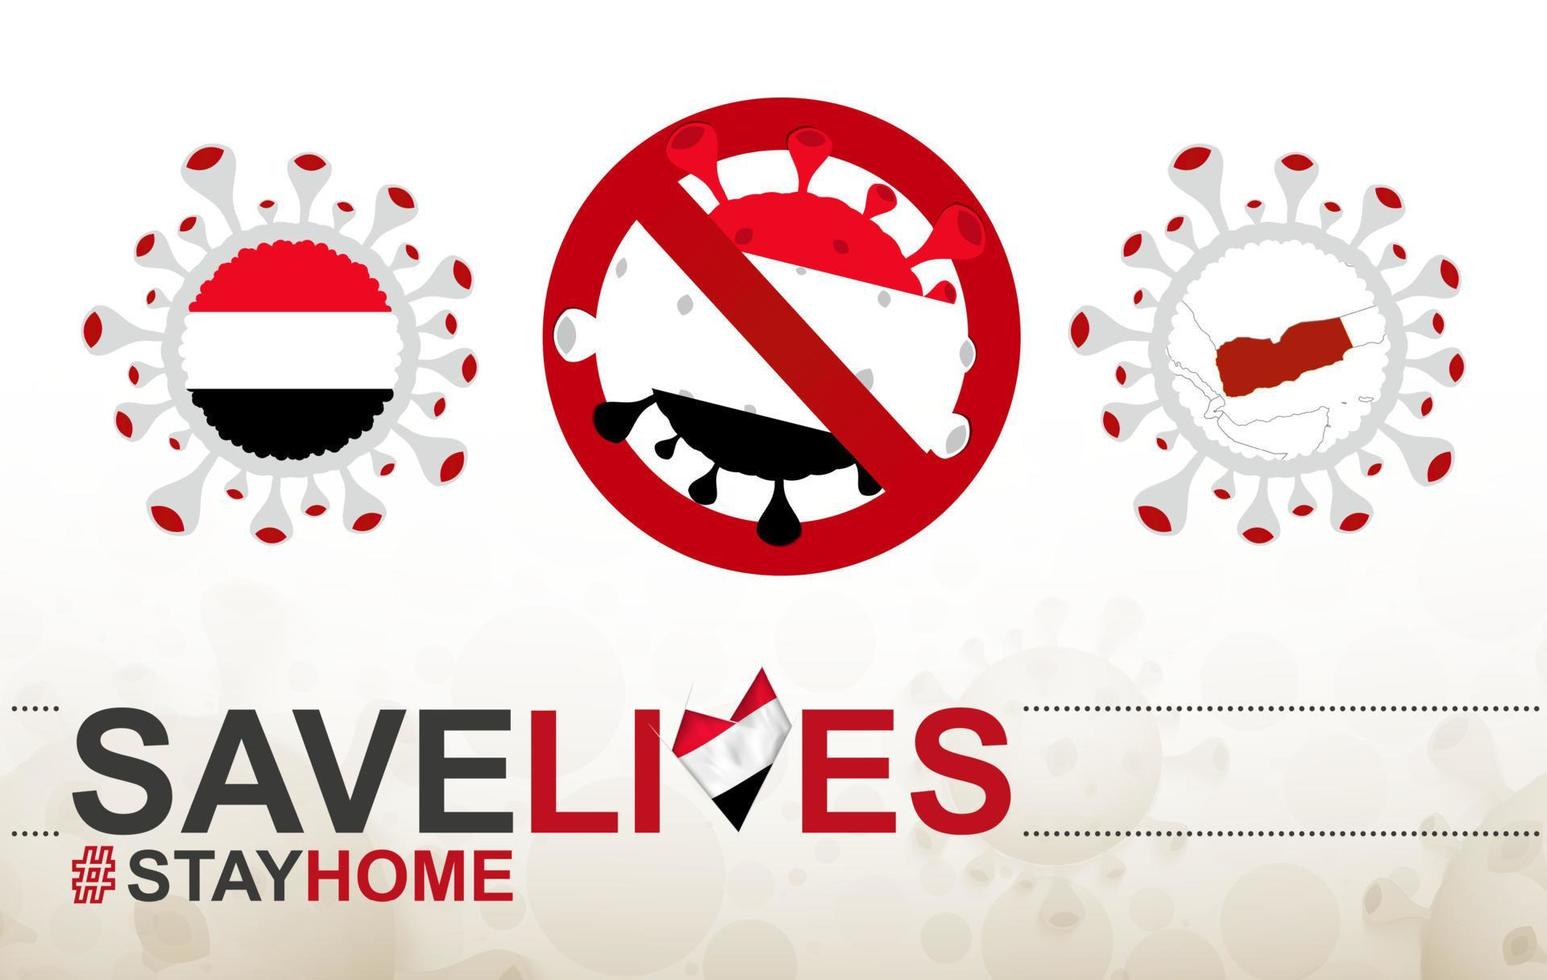 Coronavirus cell with Yemen flag and map. Stop COVID-19 sign, slogan save lives stay home with flag of Yemen vector